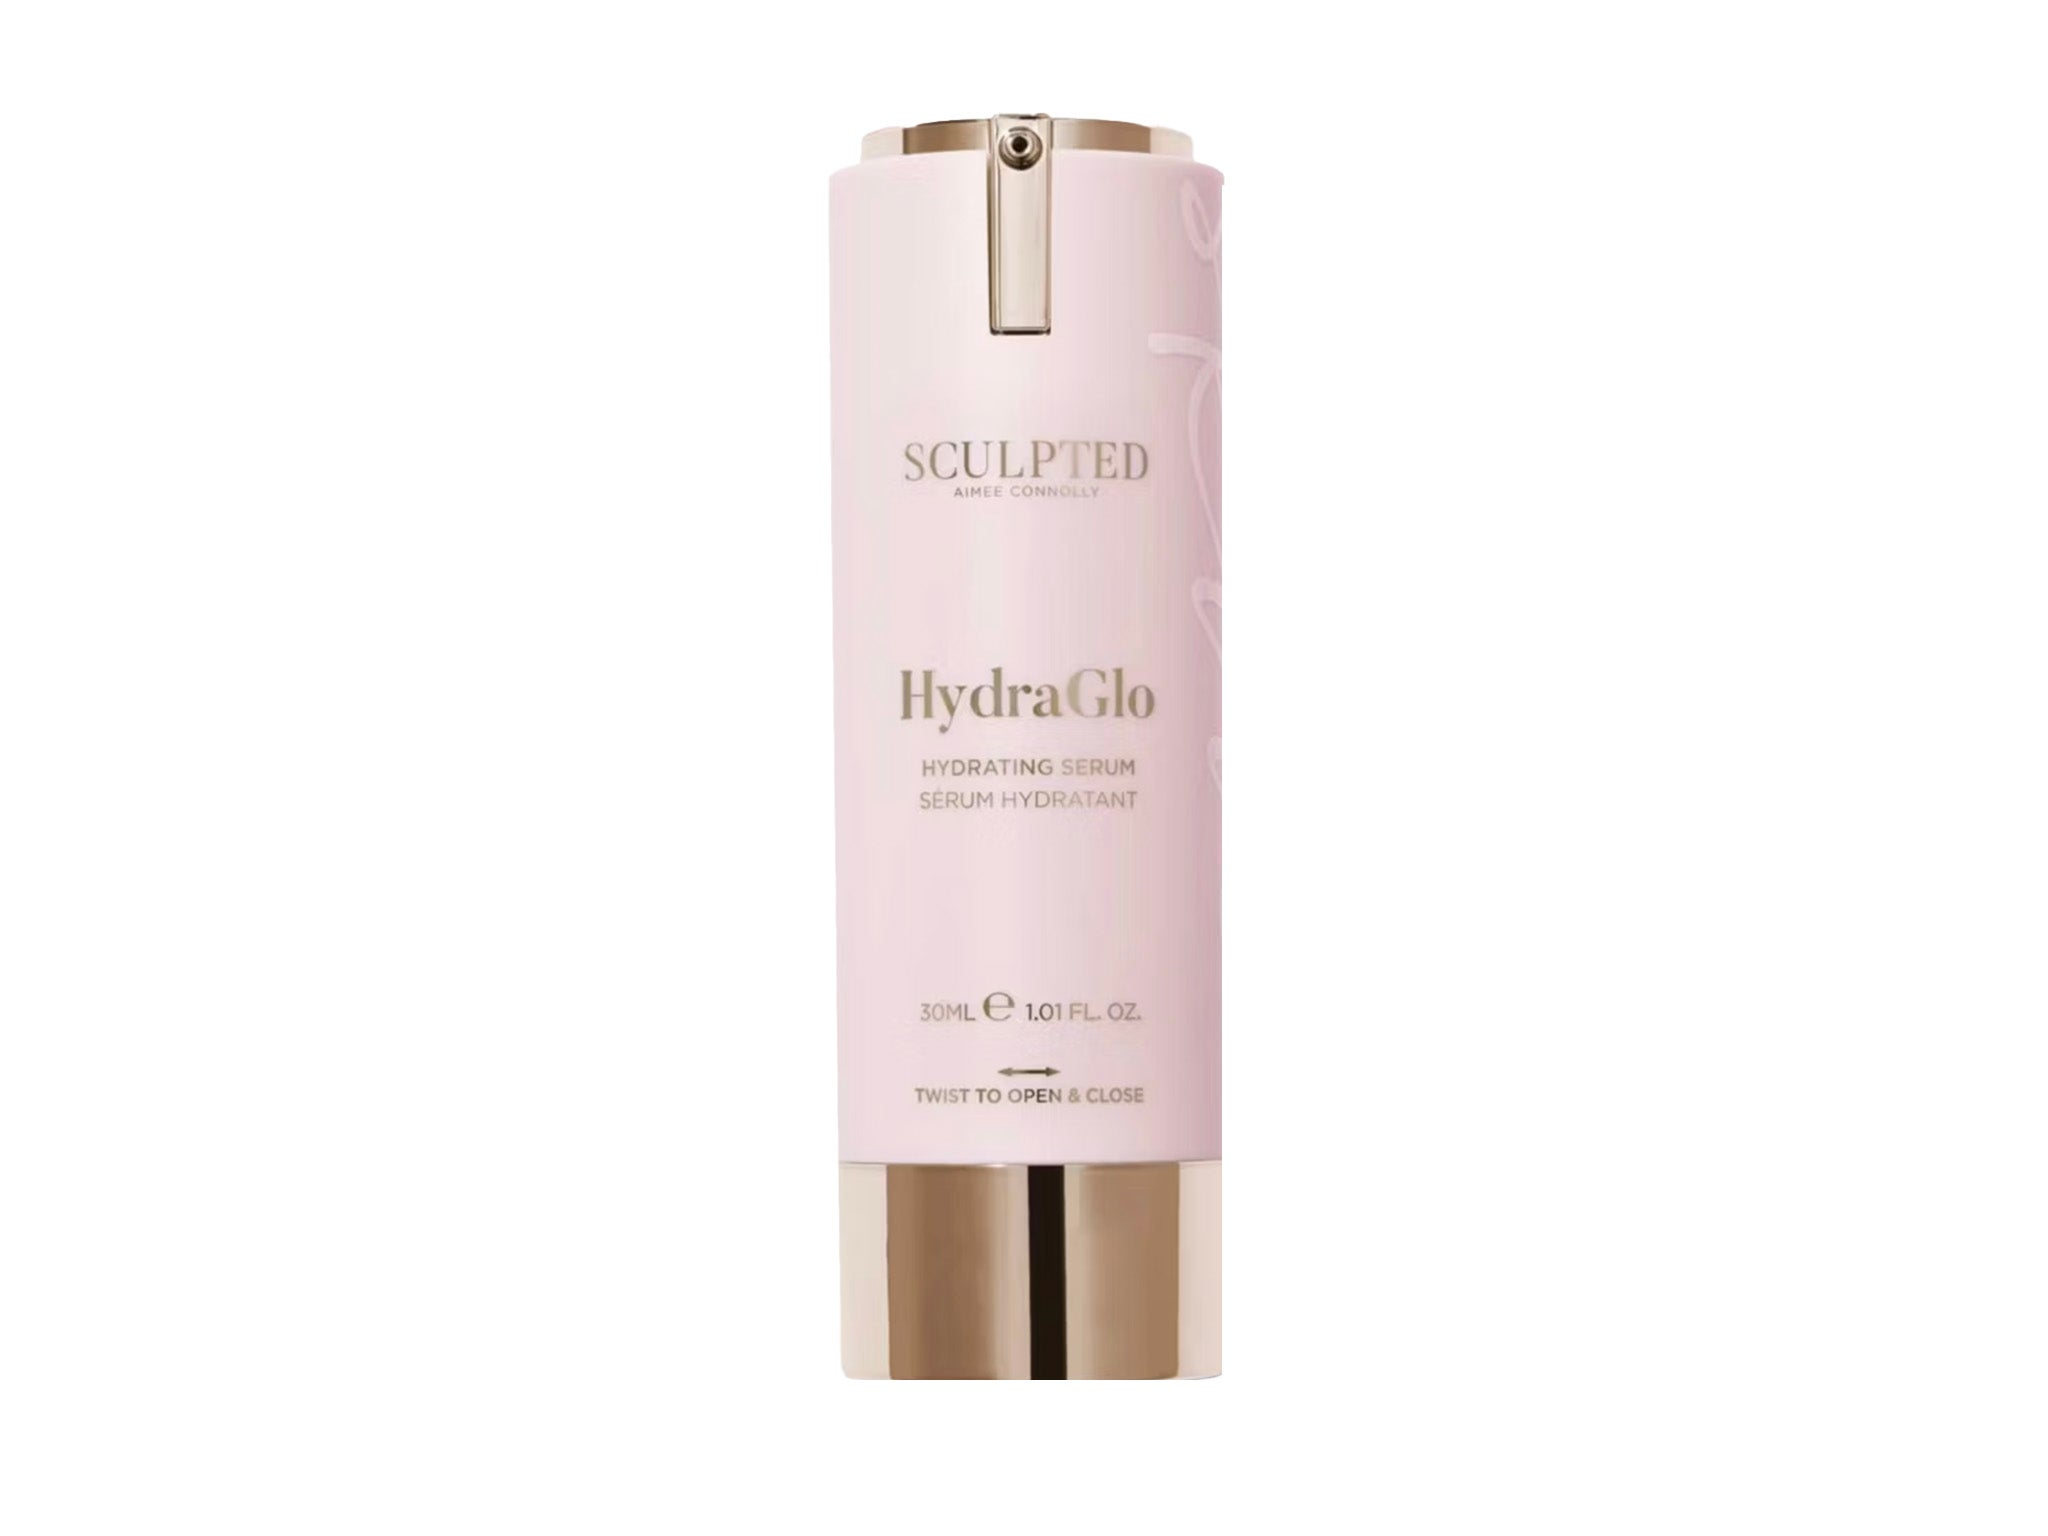 This lightweight but intensely hyrating serum is a great way to incorporate niacinamide into your routine